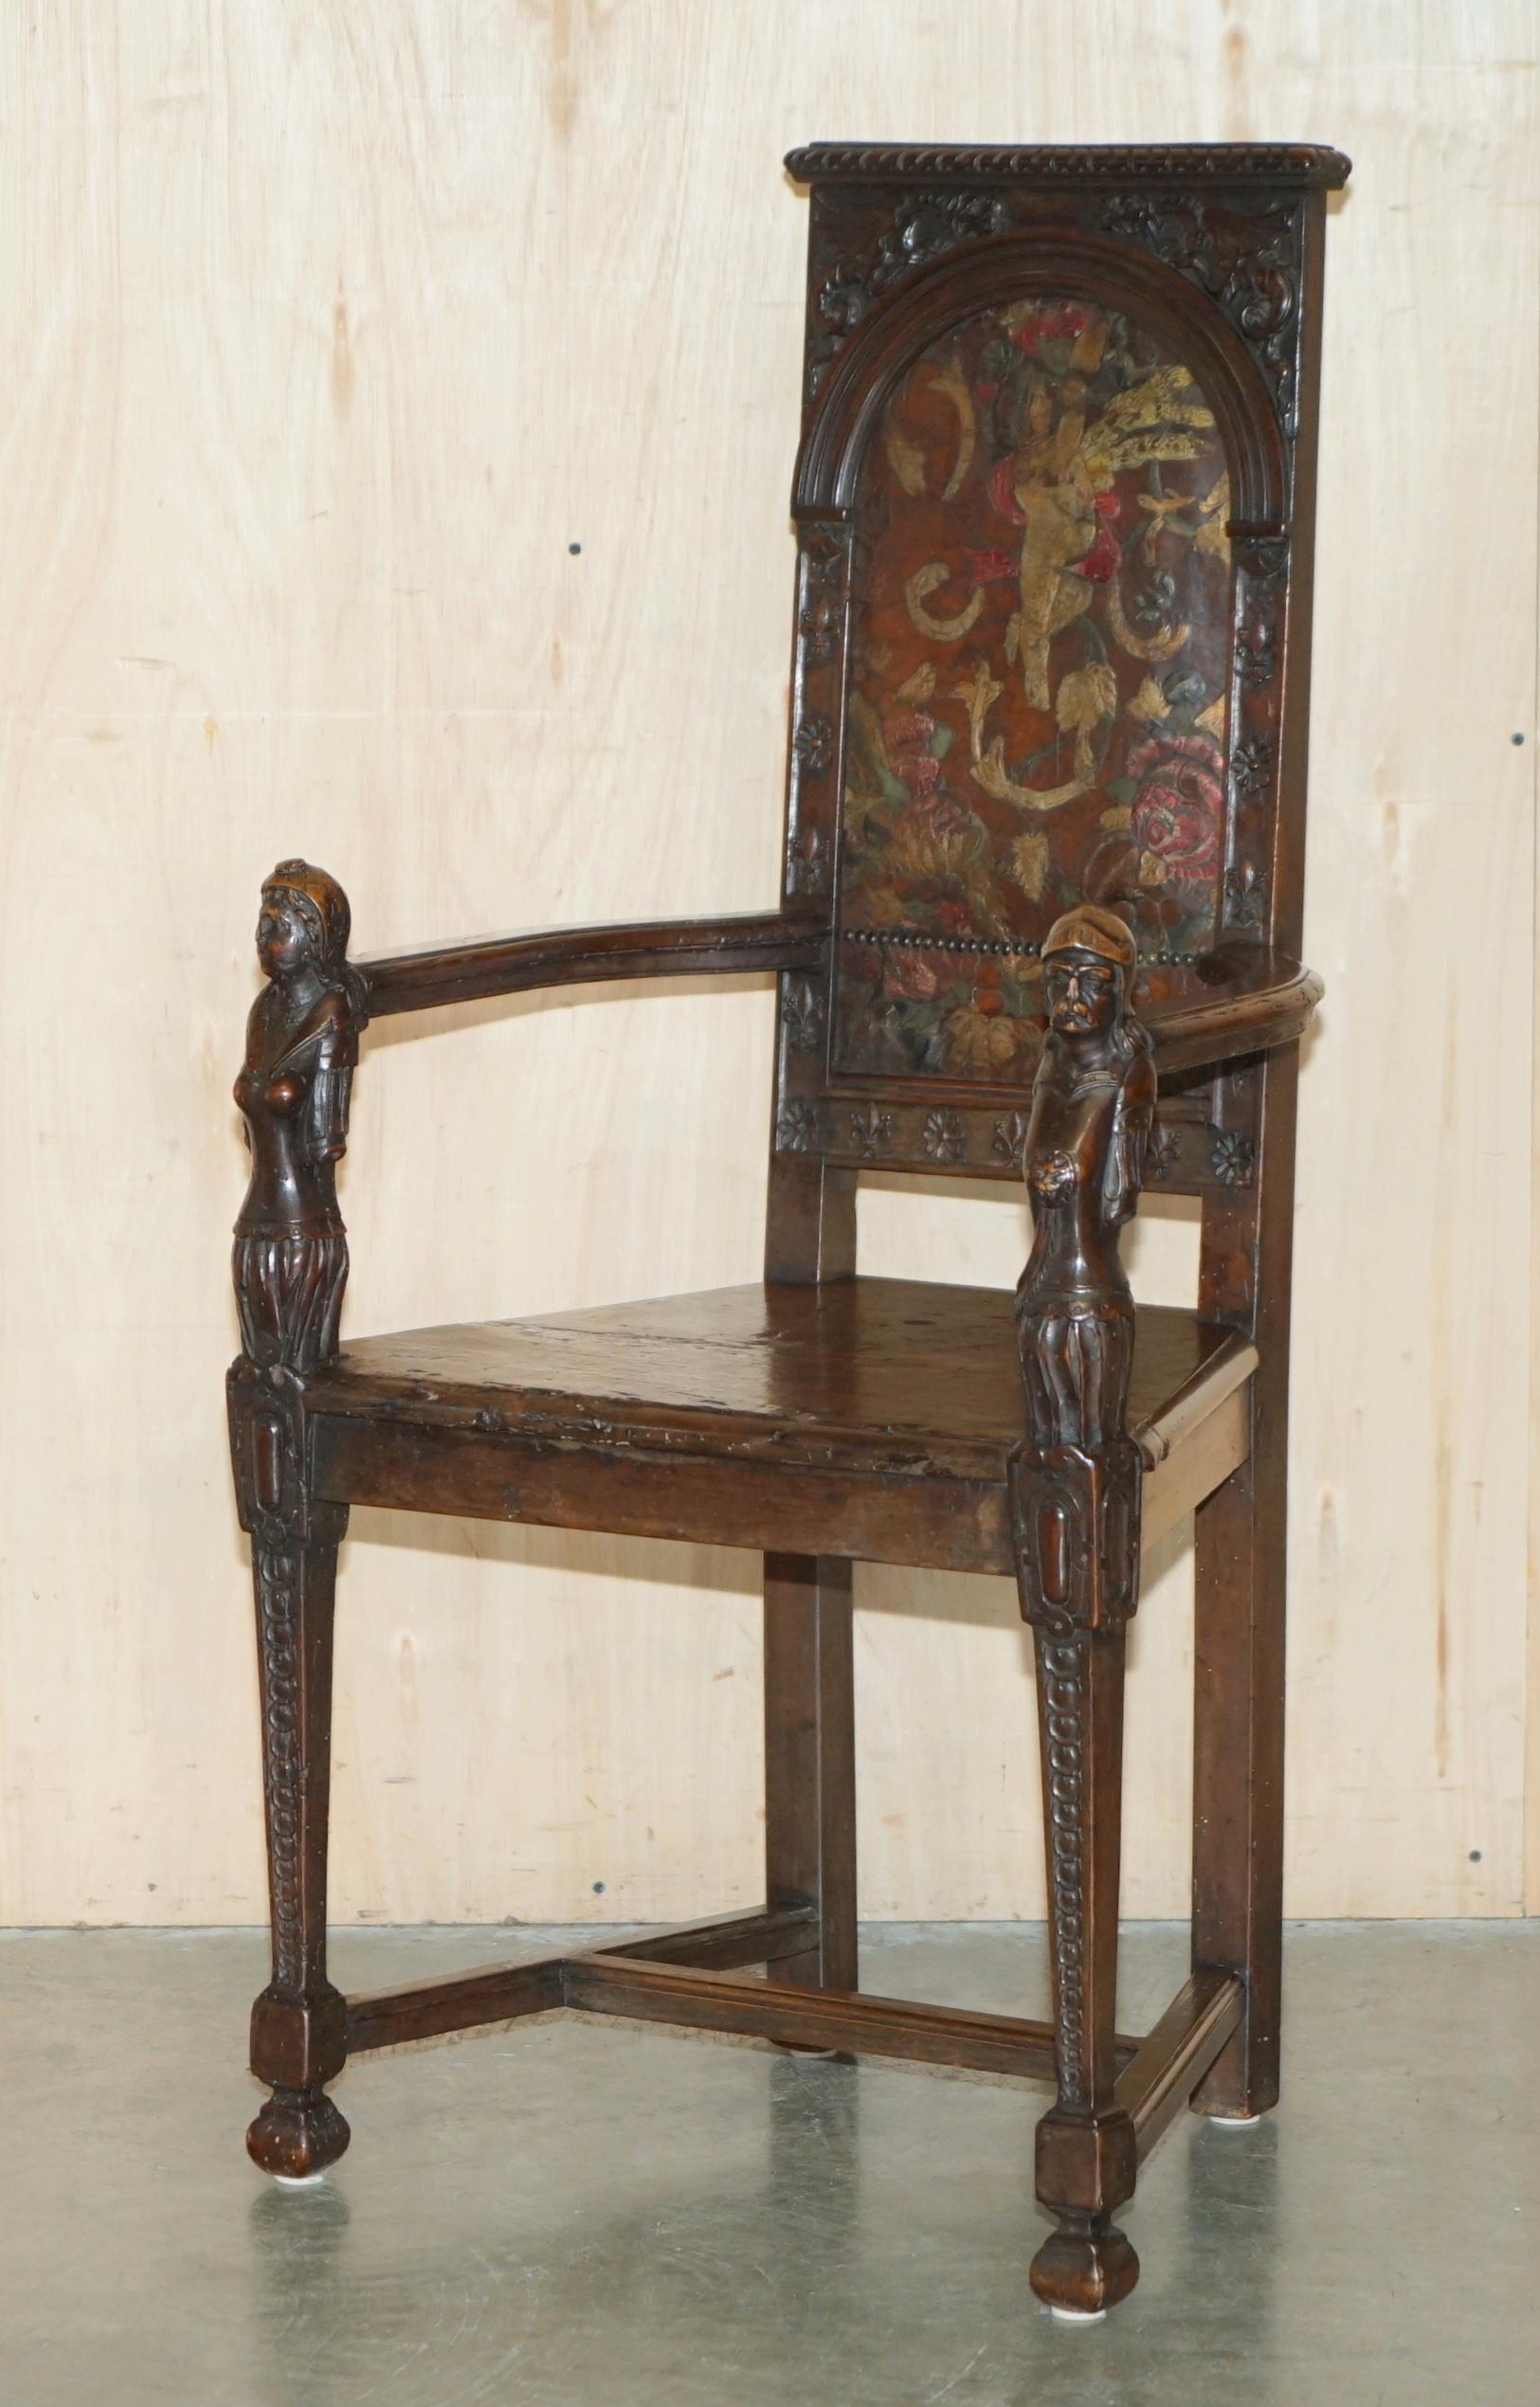 Royal House Antiques

Royal House Antiques is delighted to offer for sale this super rare pair of totally original 17th century circa 1640-1680 French Caquetoire armchairs with ornately carved arms and period, Polychrome painted leather back